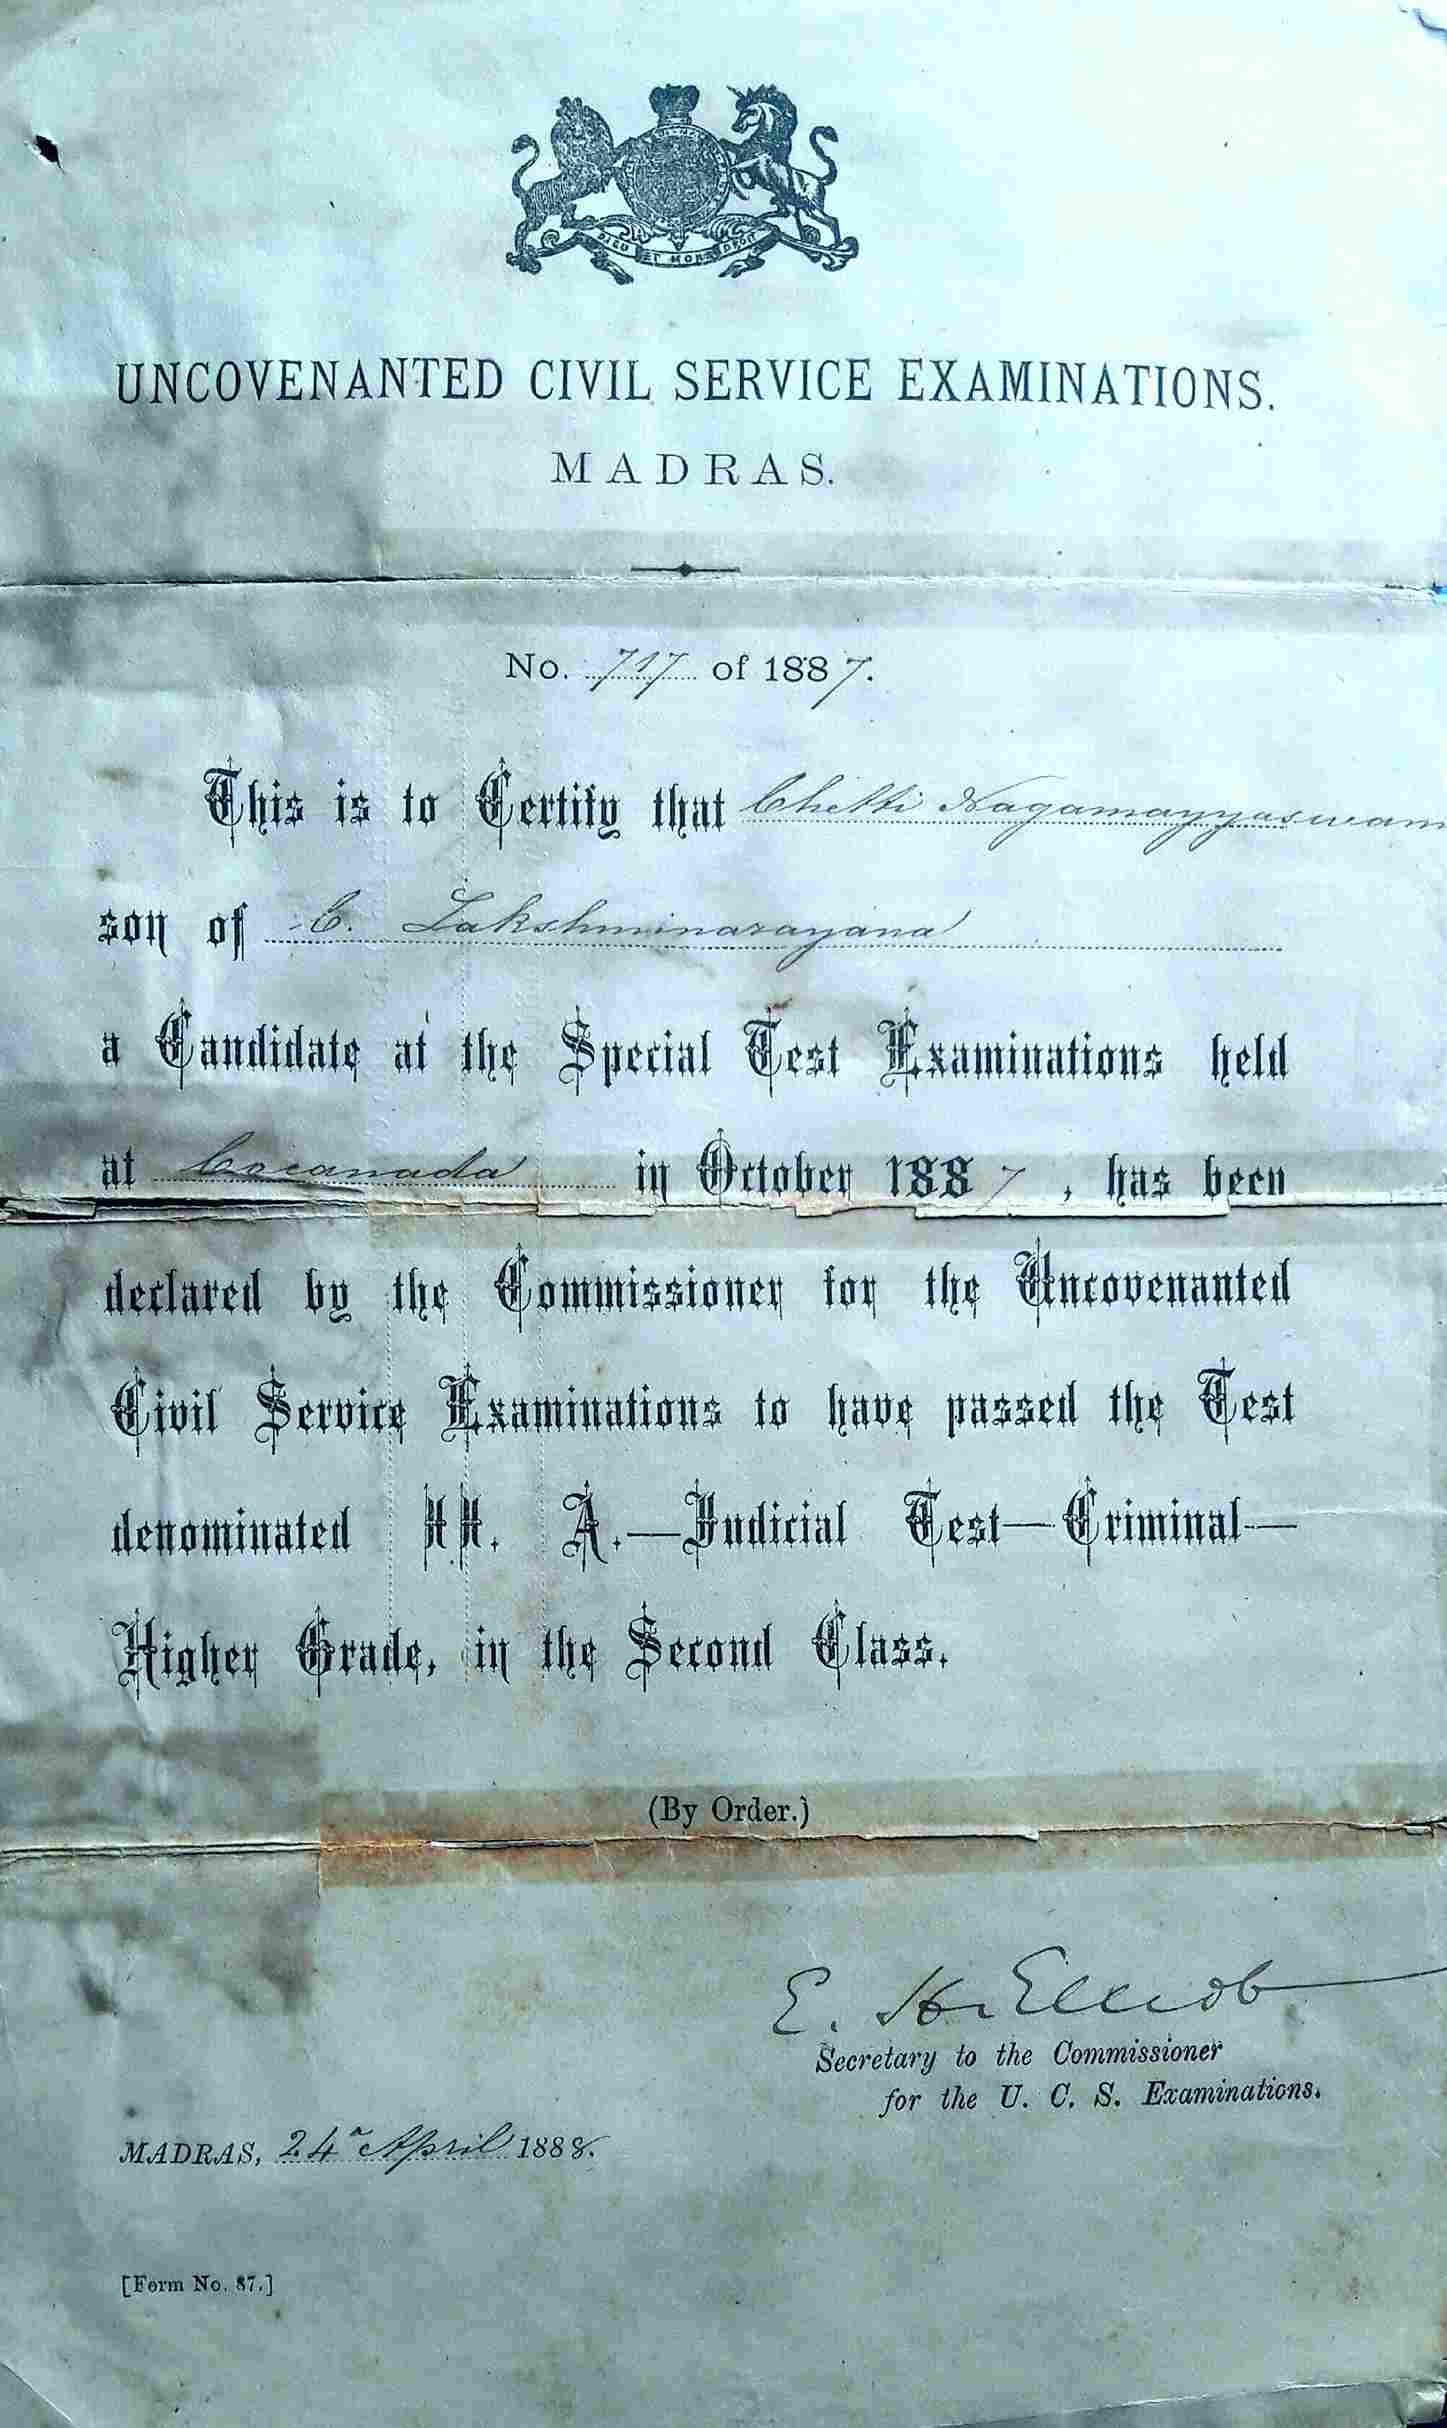 One of the oldest civil service certificates dating back to pre-Independent India